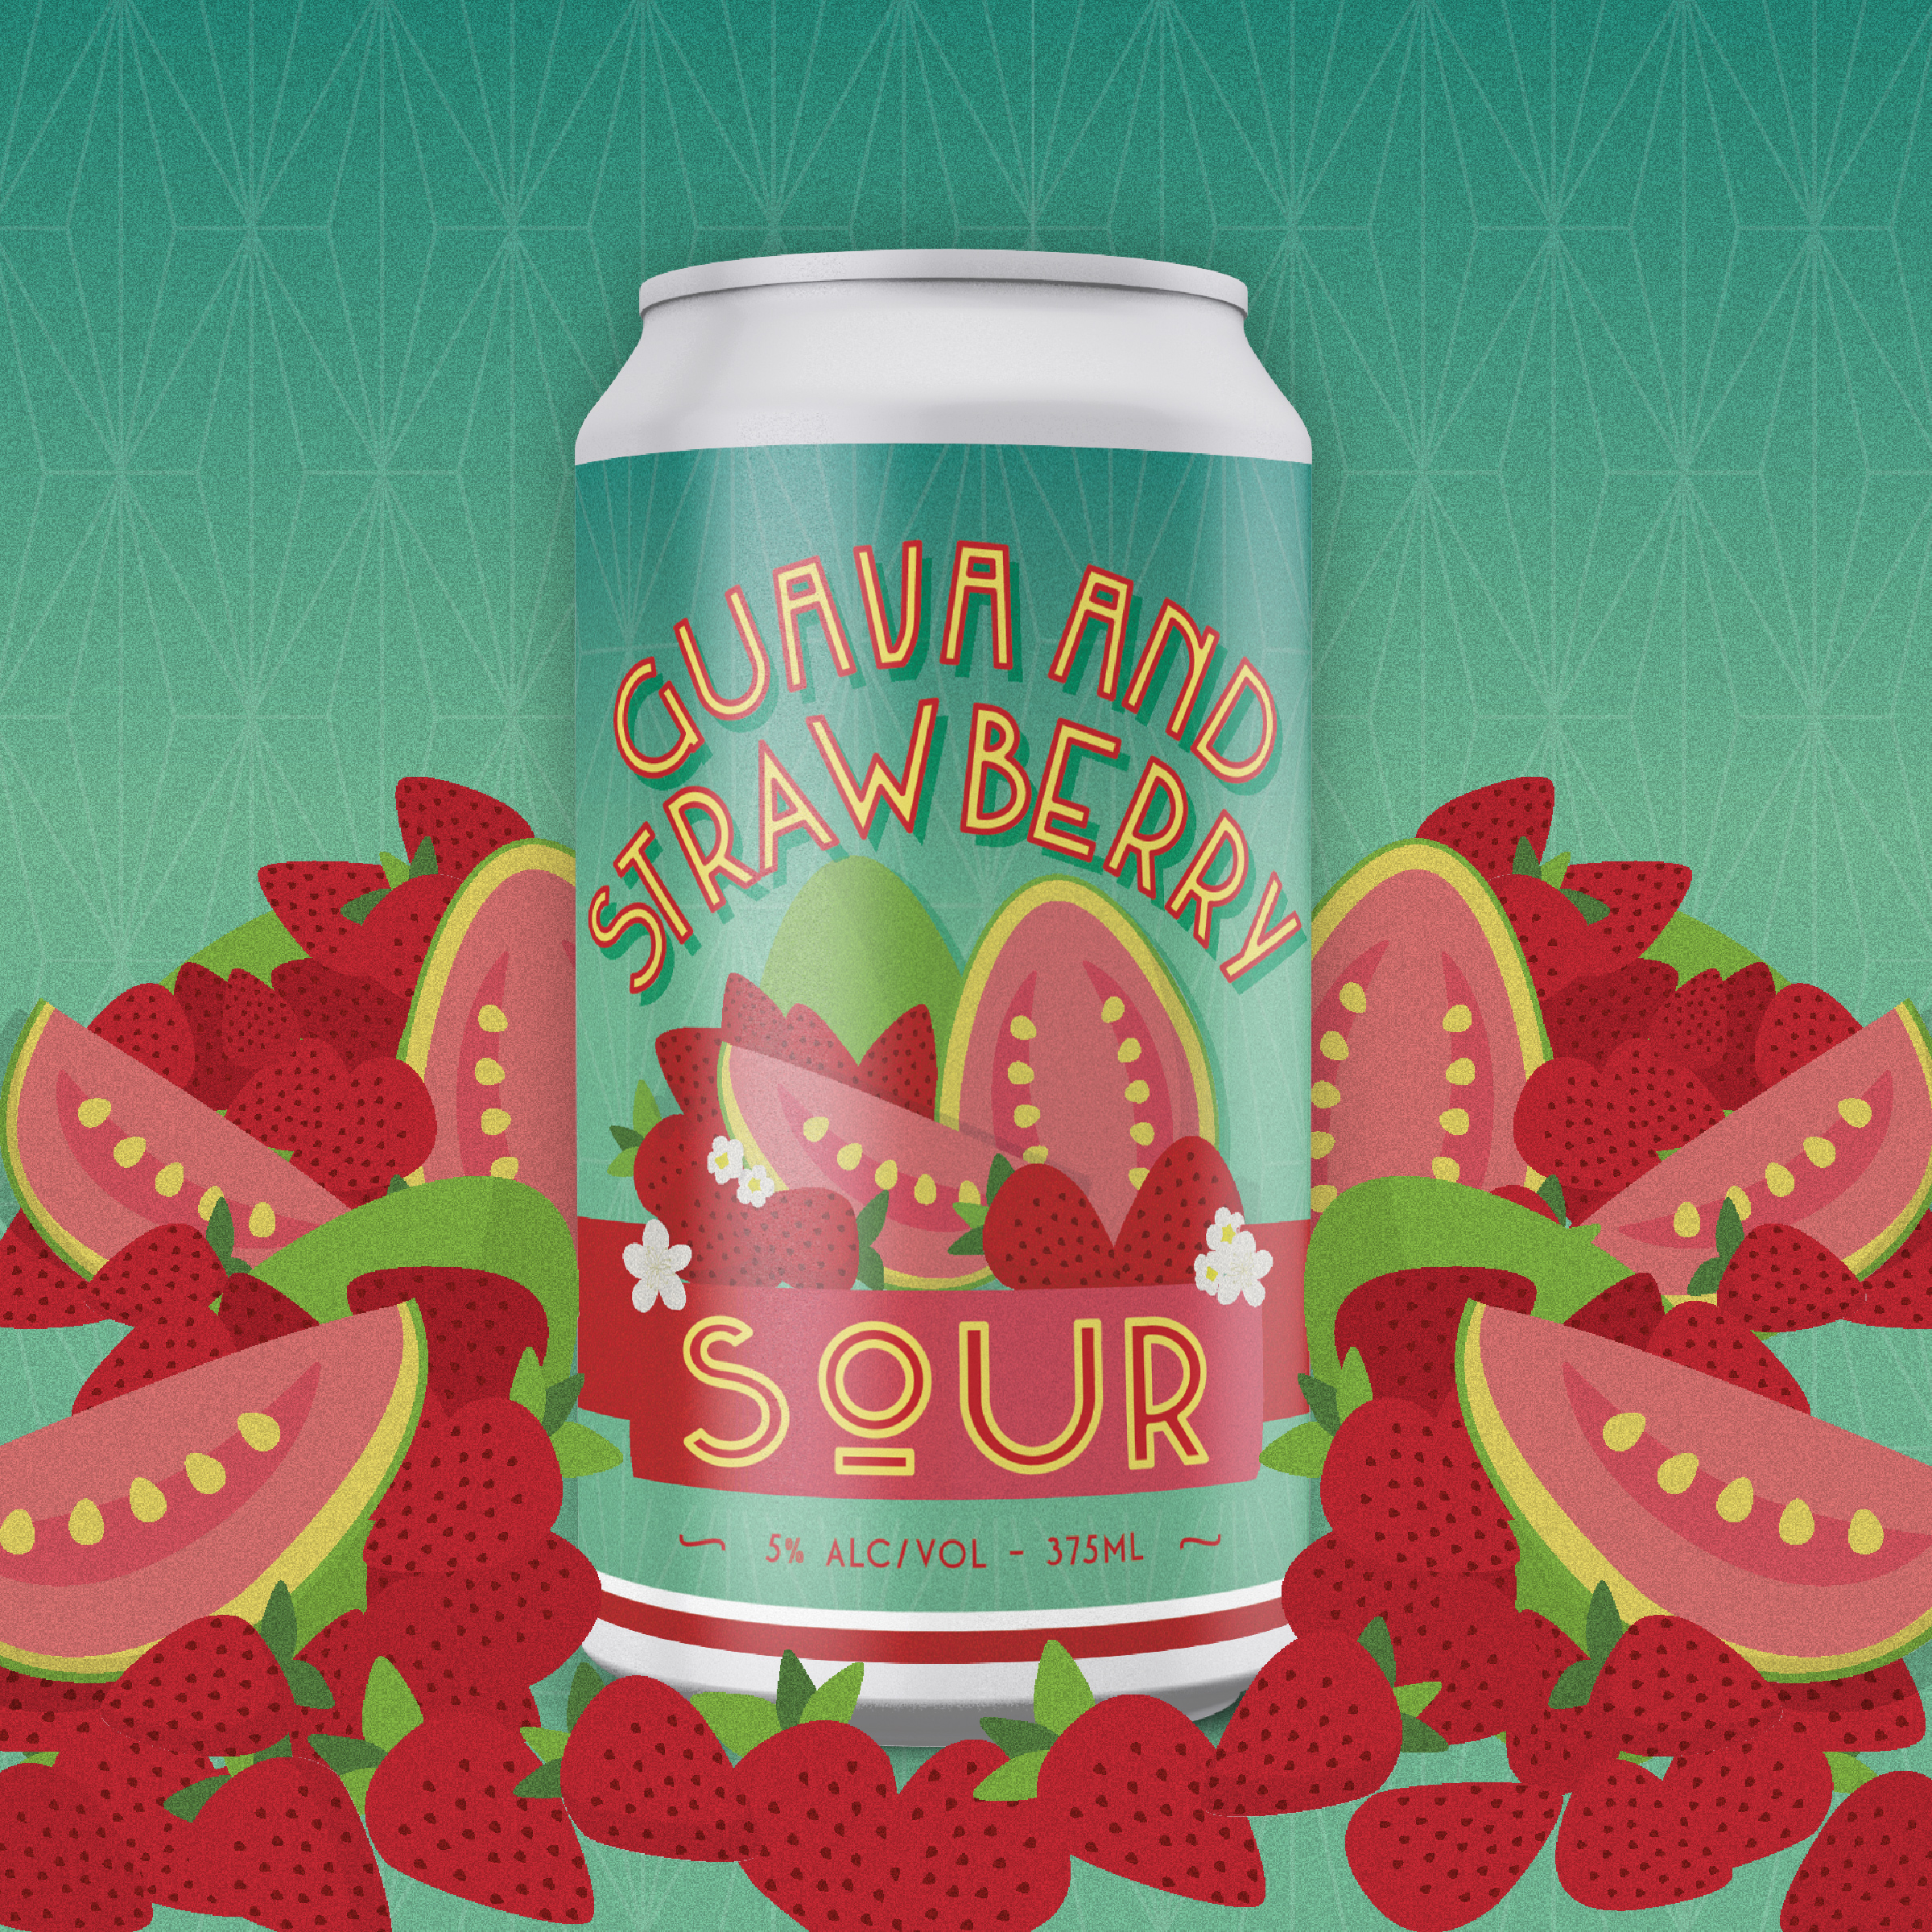 Guava and Strawberry Sour